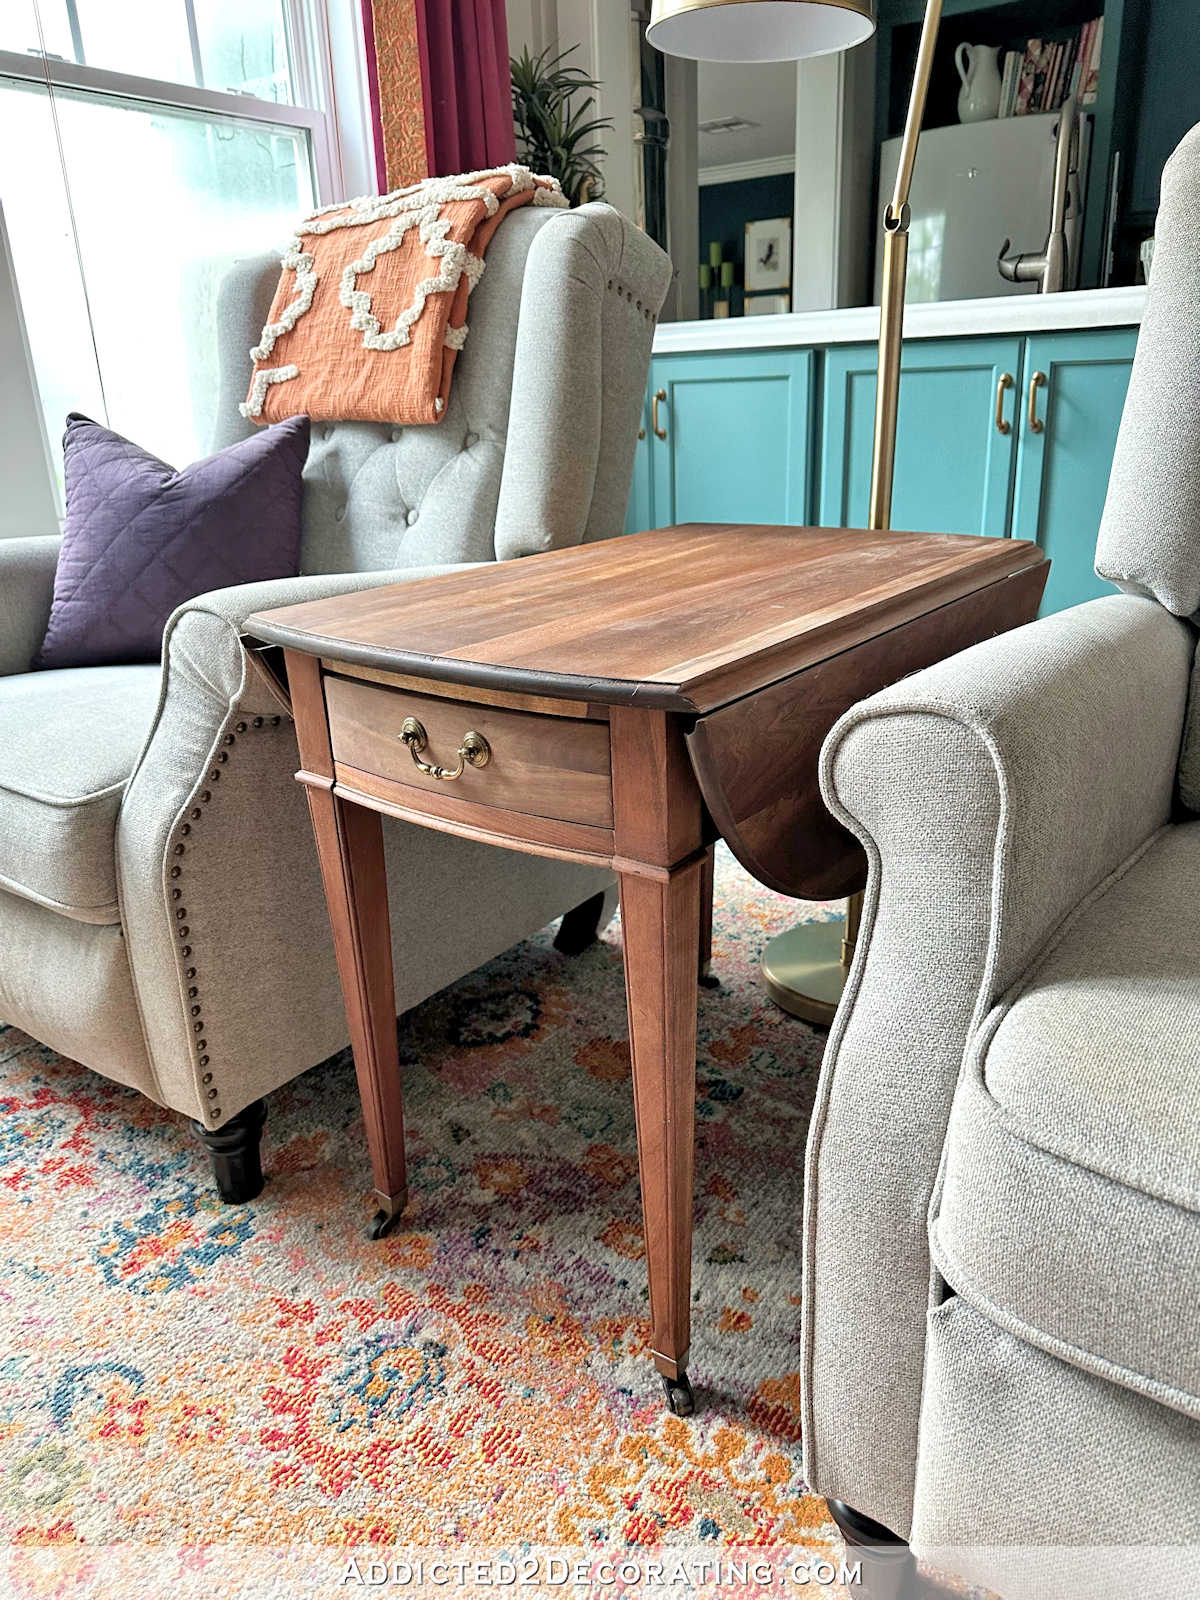 A 30-Minute Side Table Makeover With Danish Oil